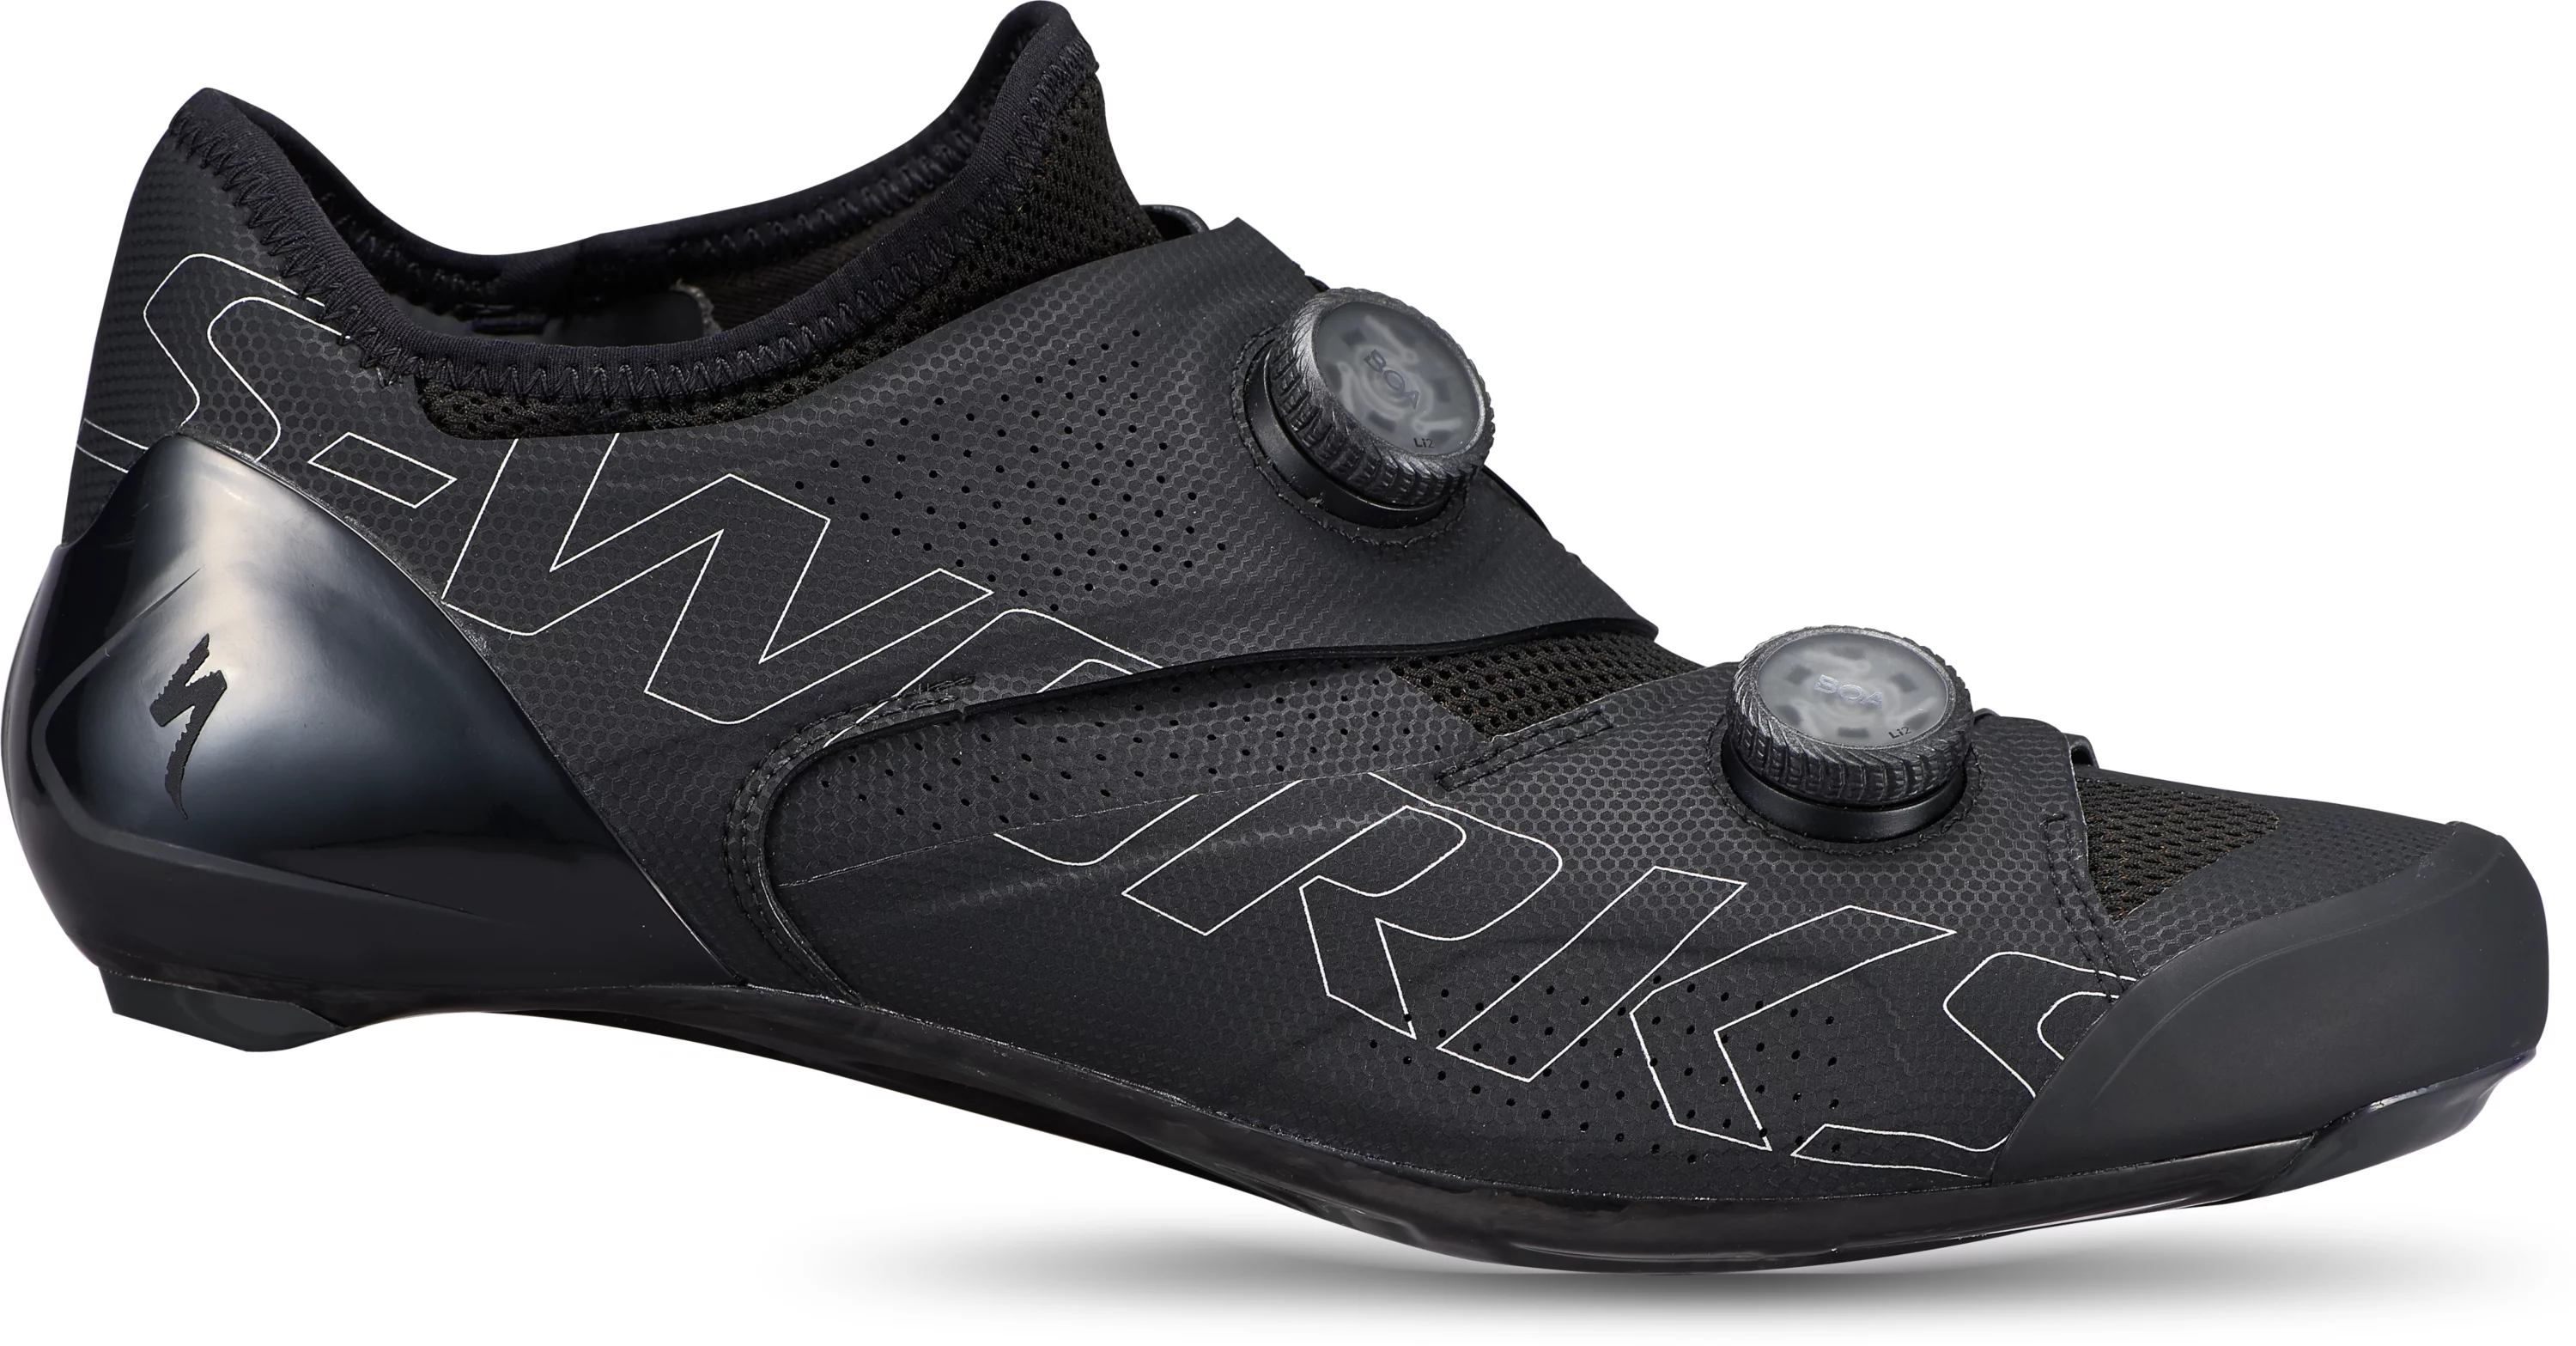 S-Works_Ares_Road_Shoes